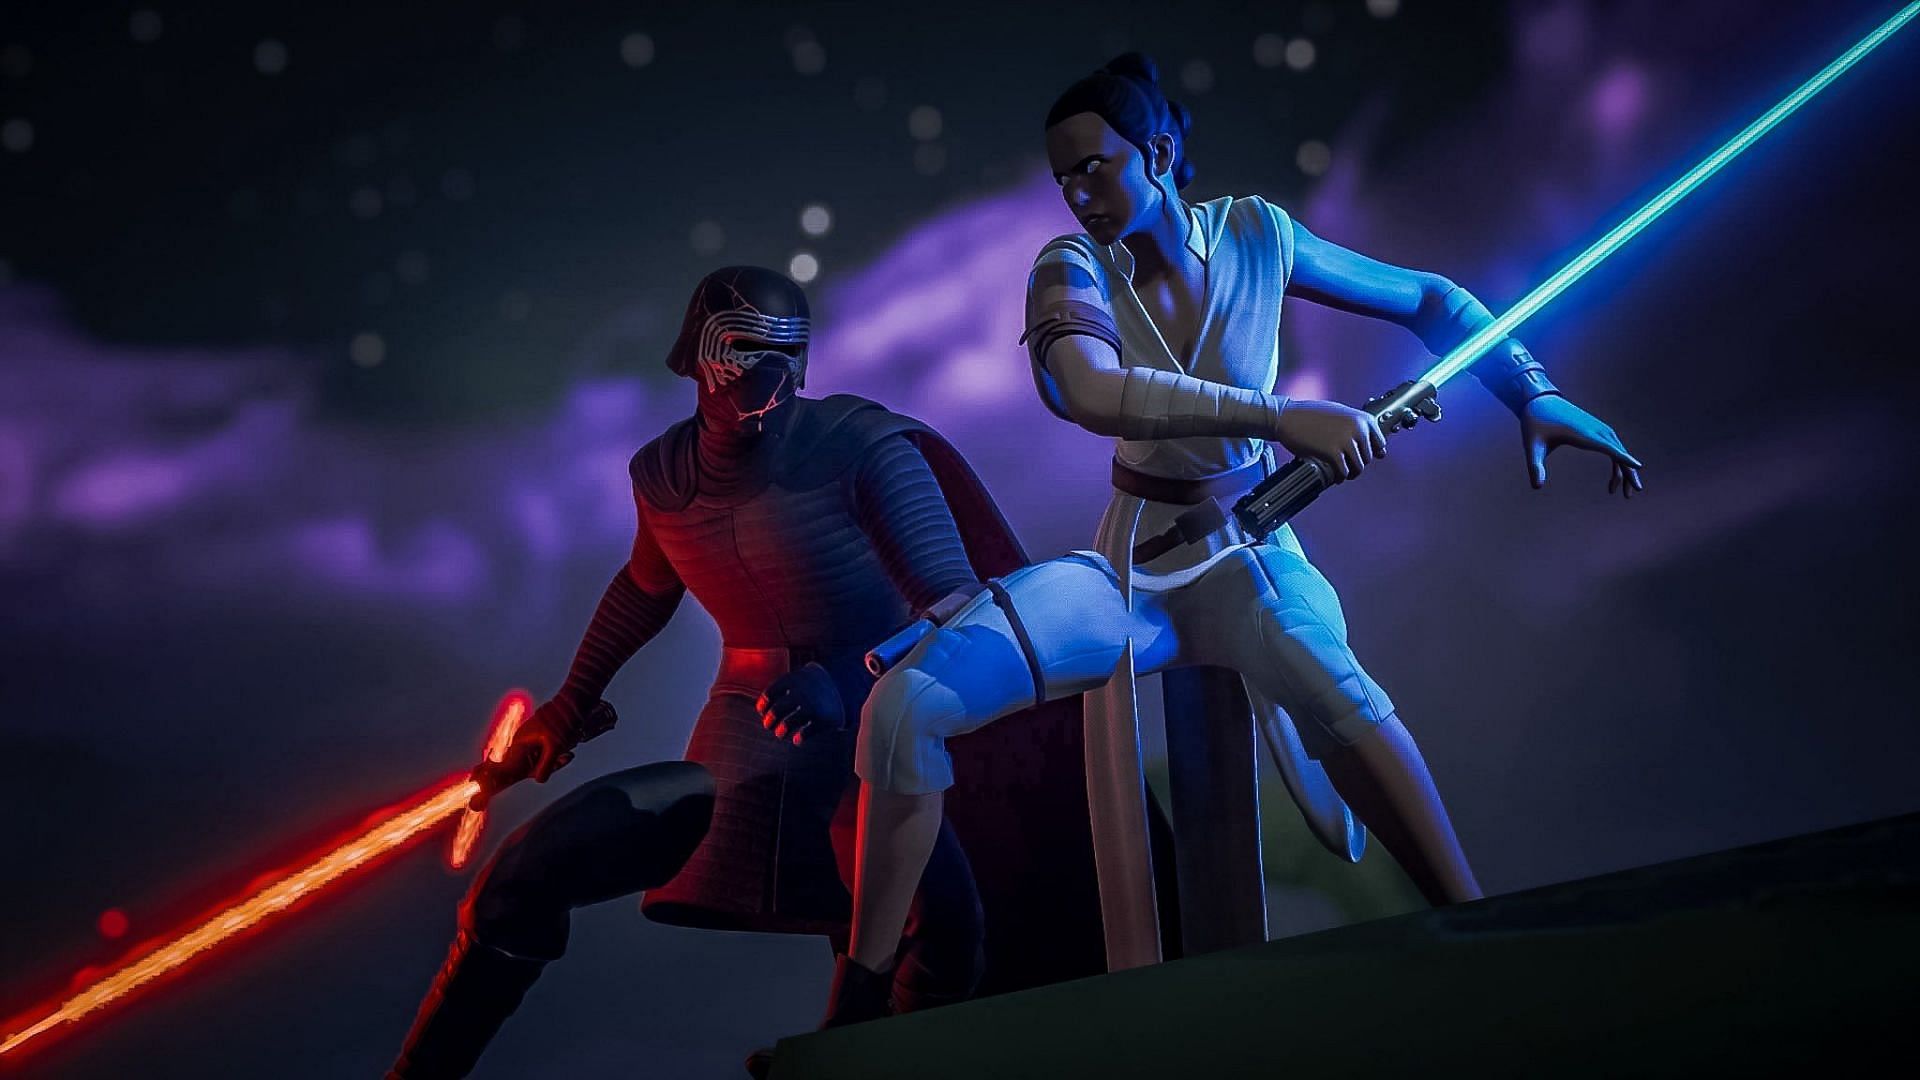 Fortnite x Star Wars collaboration with Force Powers and Lightsabers